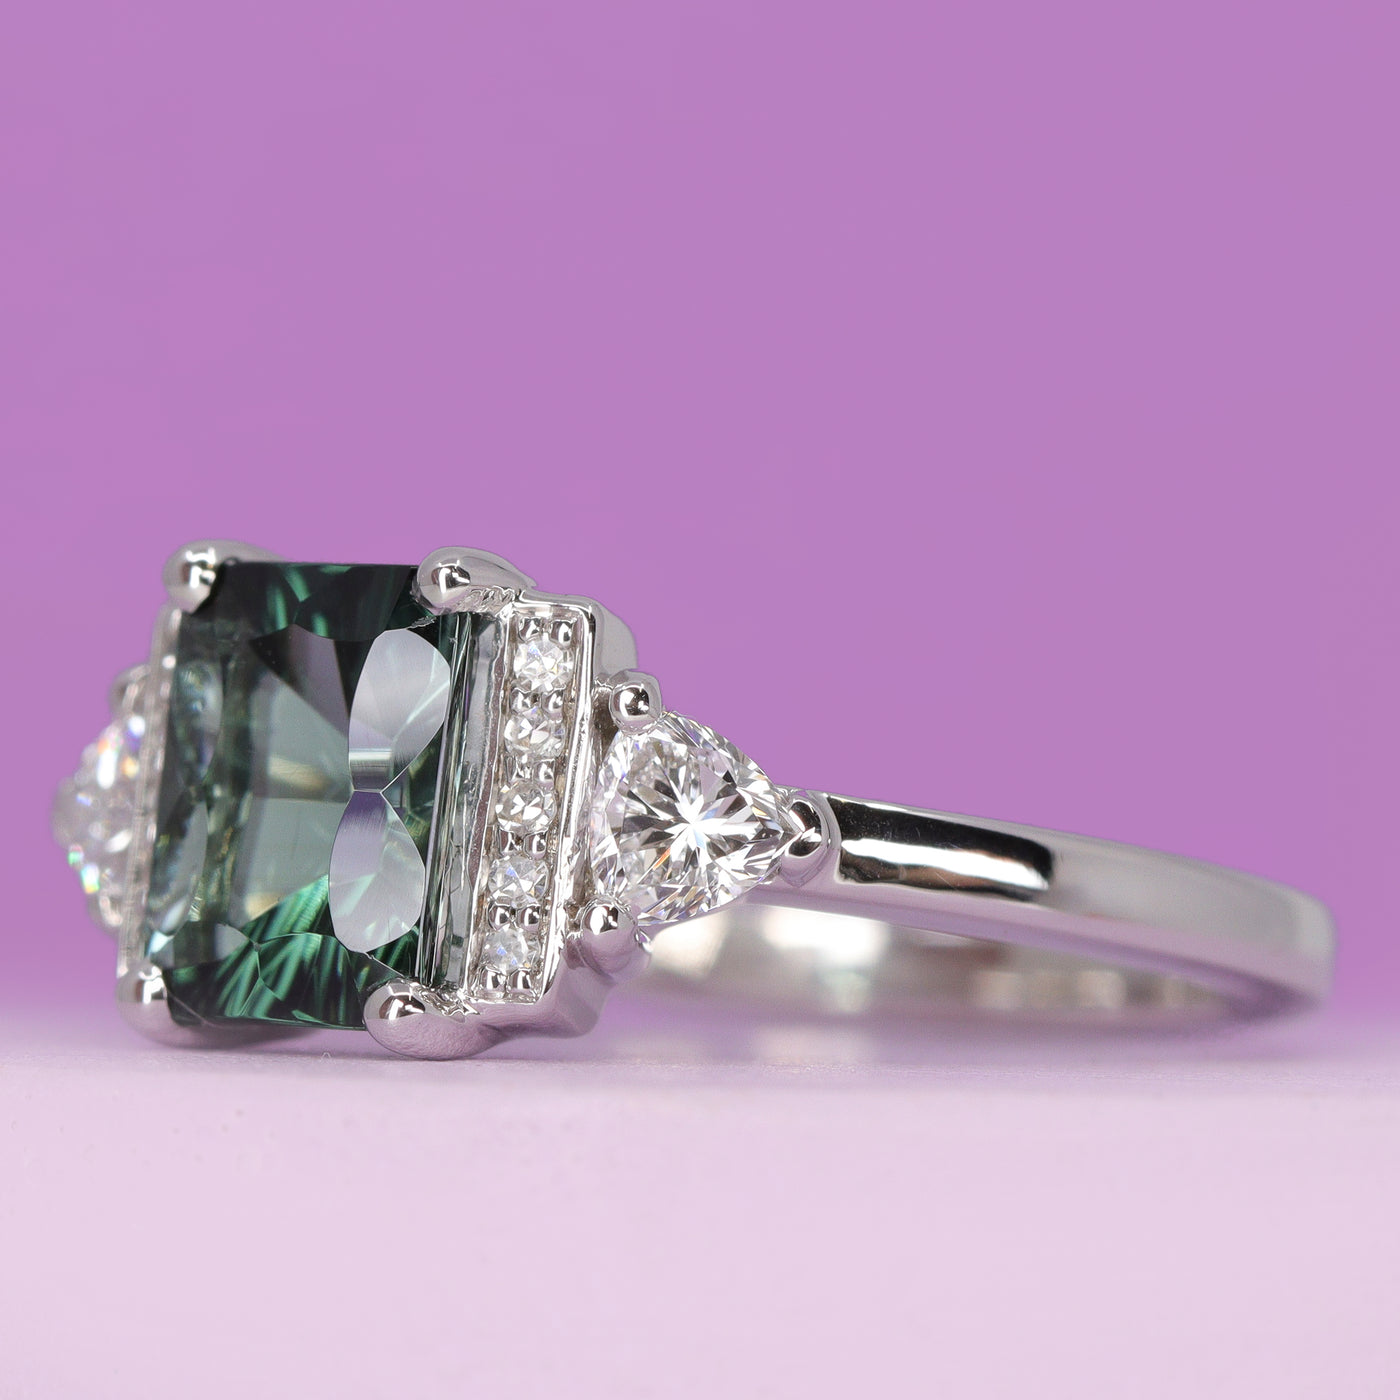 Ophelia -  Optix Emerald Cut Green Tourmaline Art Deco Engagement Ring in 14ct White Gold - Ready-to-Wear